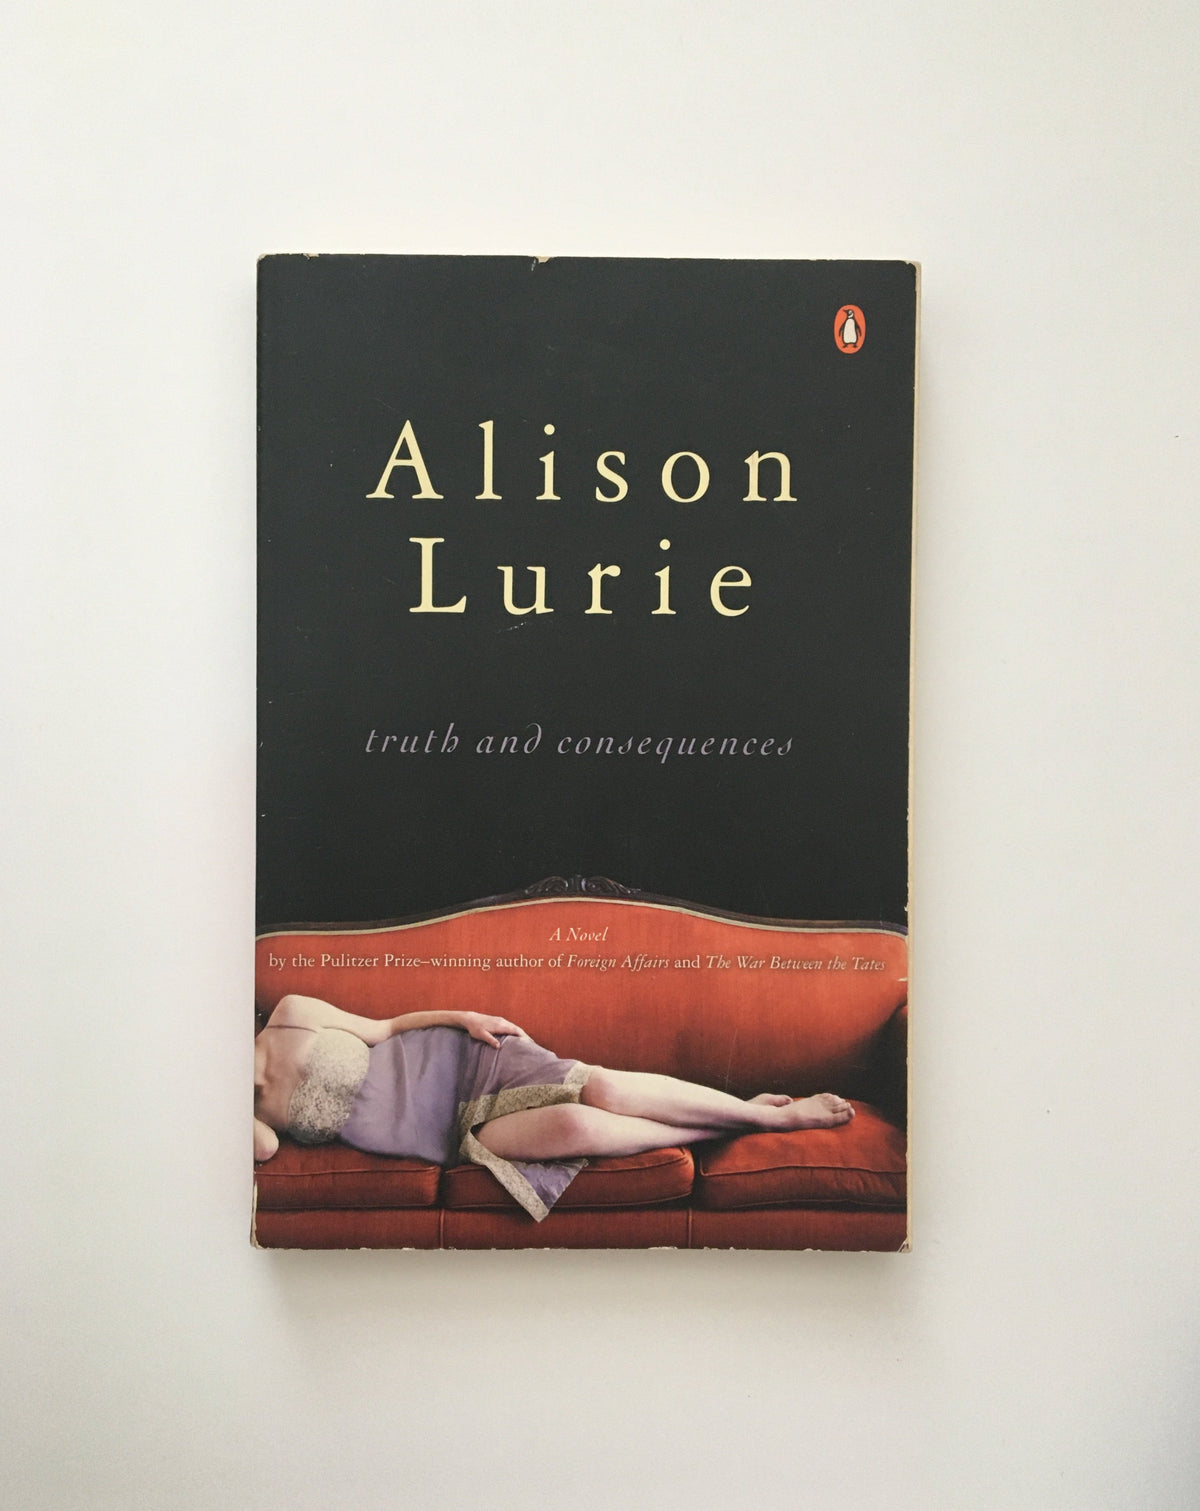 Truth and Consequences by Alison Lurie, book, Ten Dollar Books, Ten Dollar Books